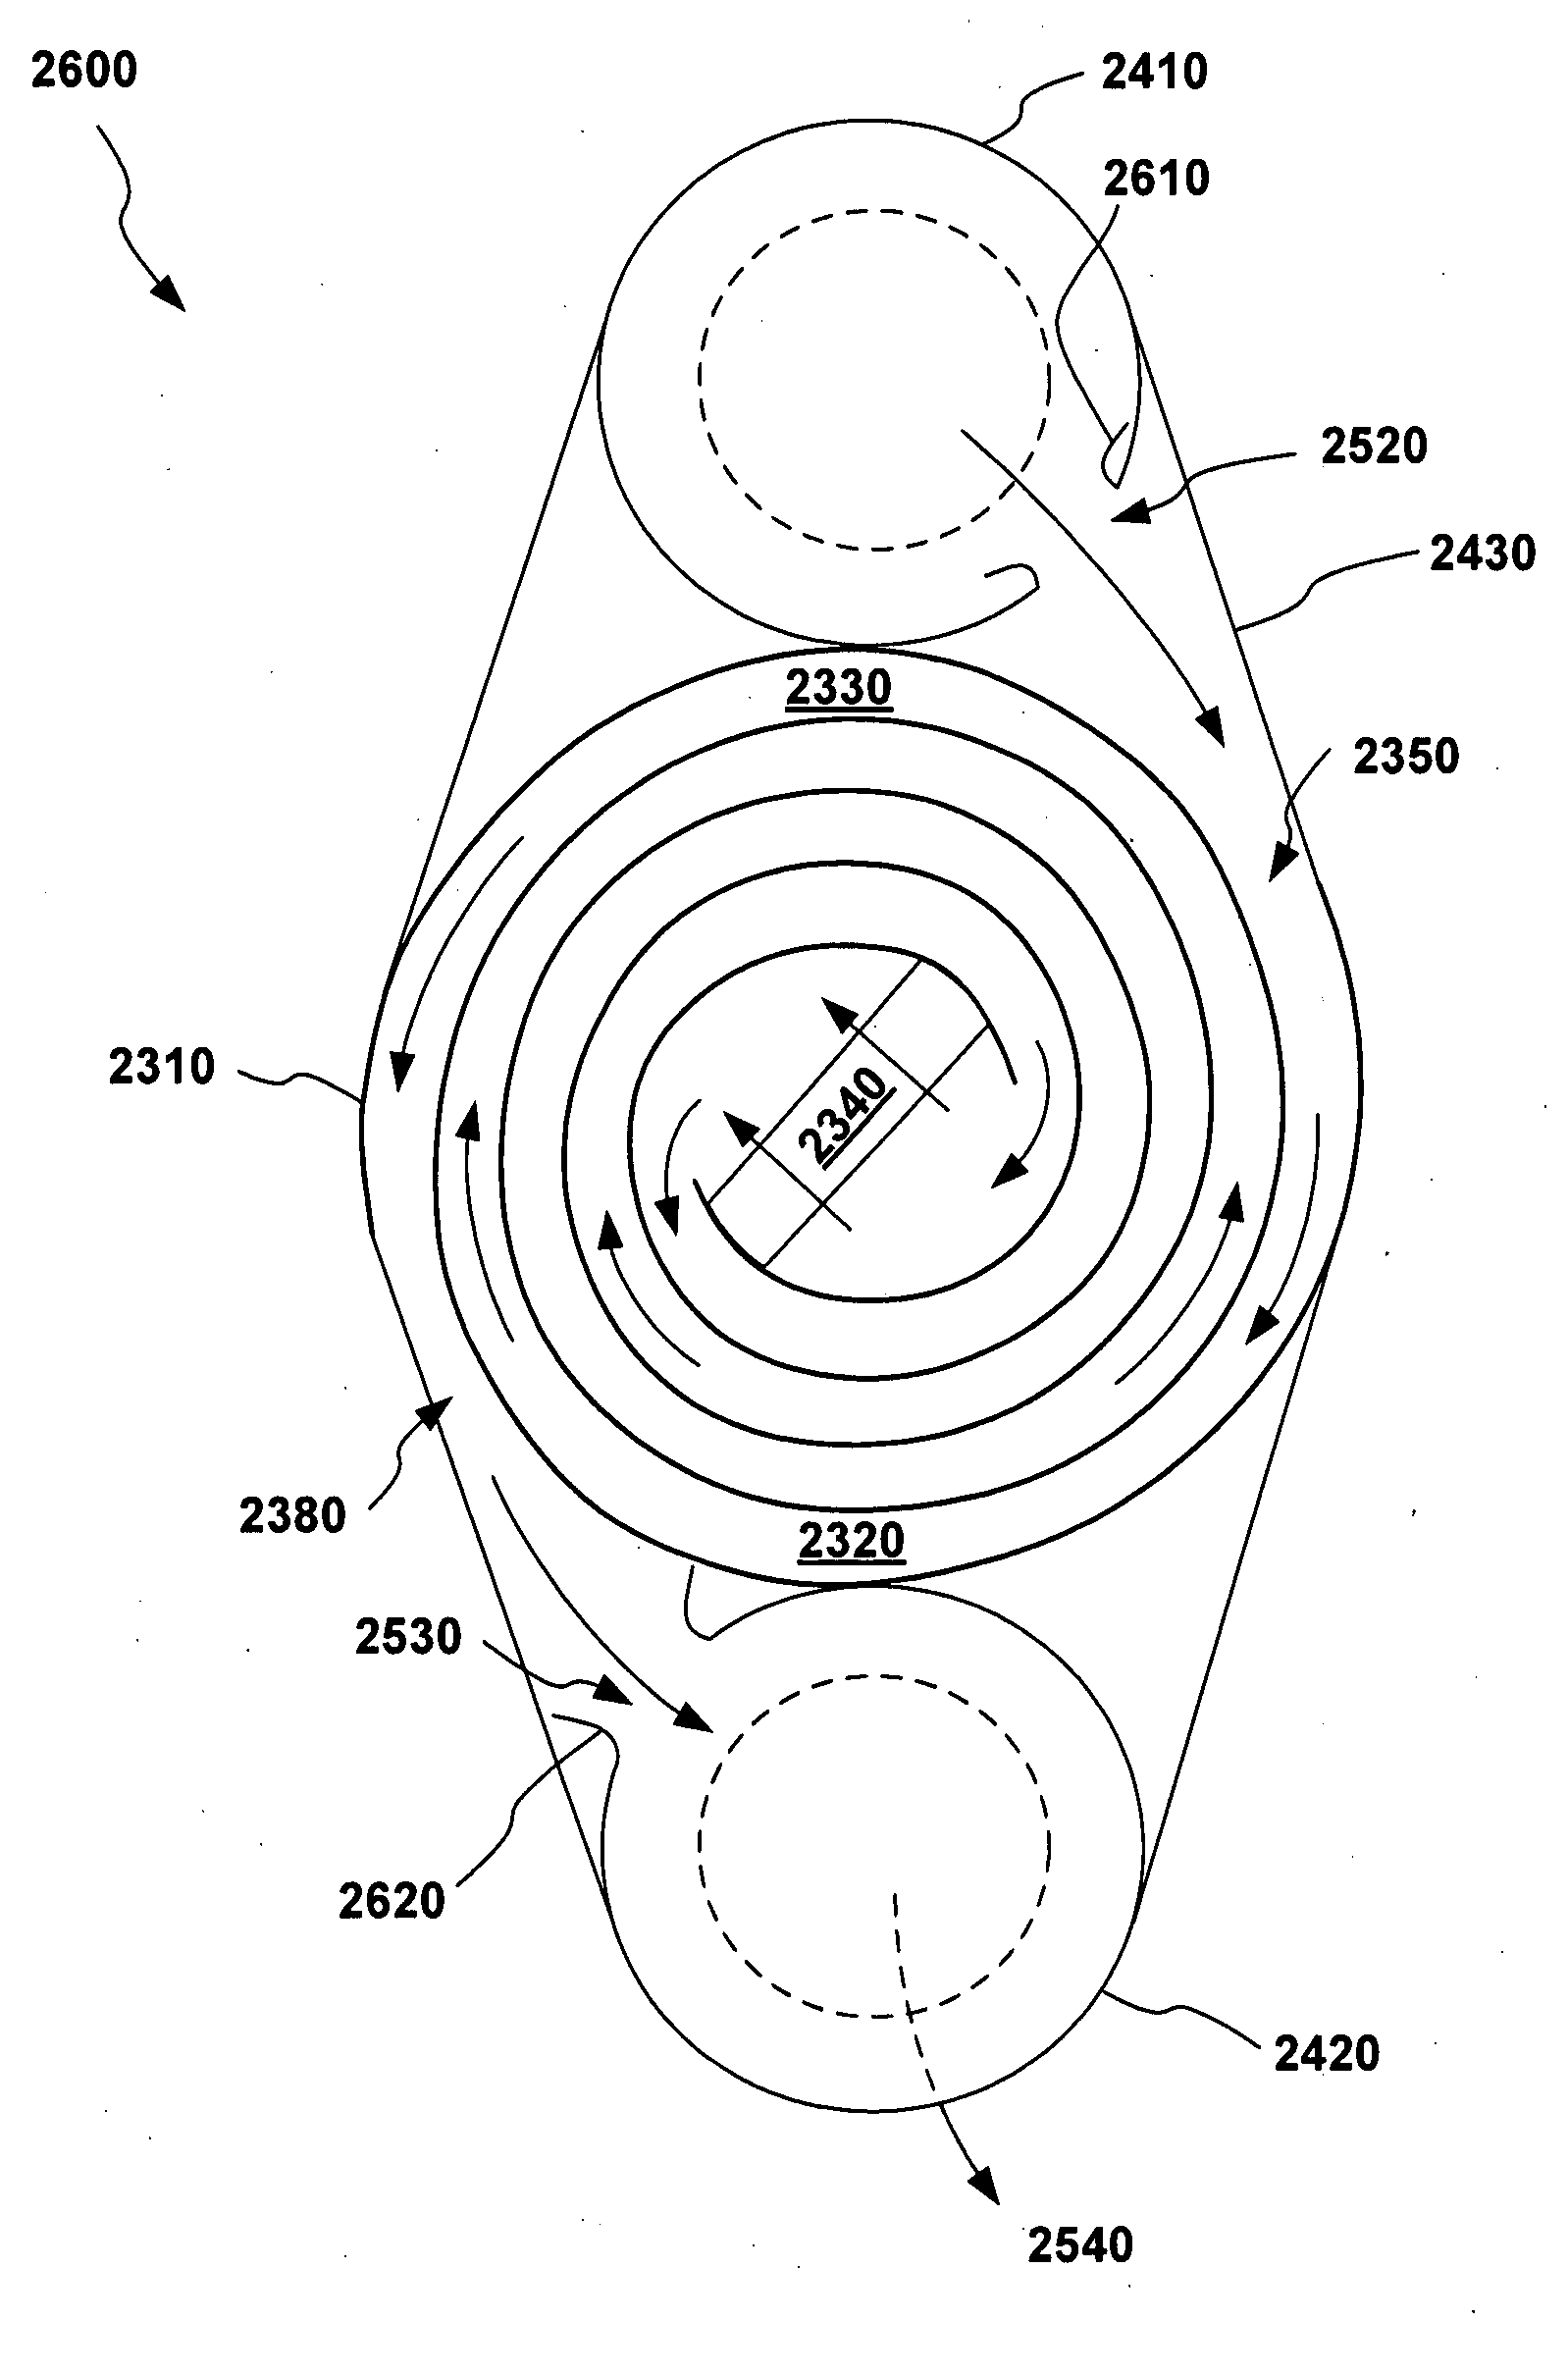 Particle burner including a catalyst booster for exhaust systems